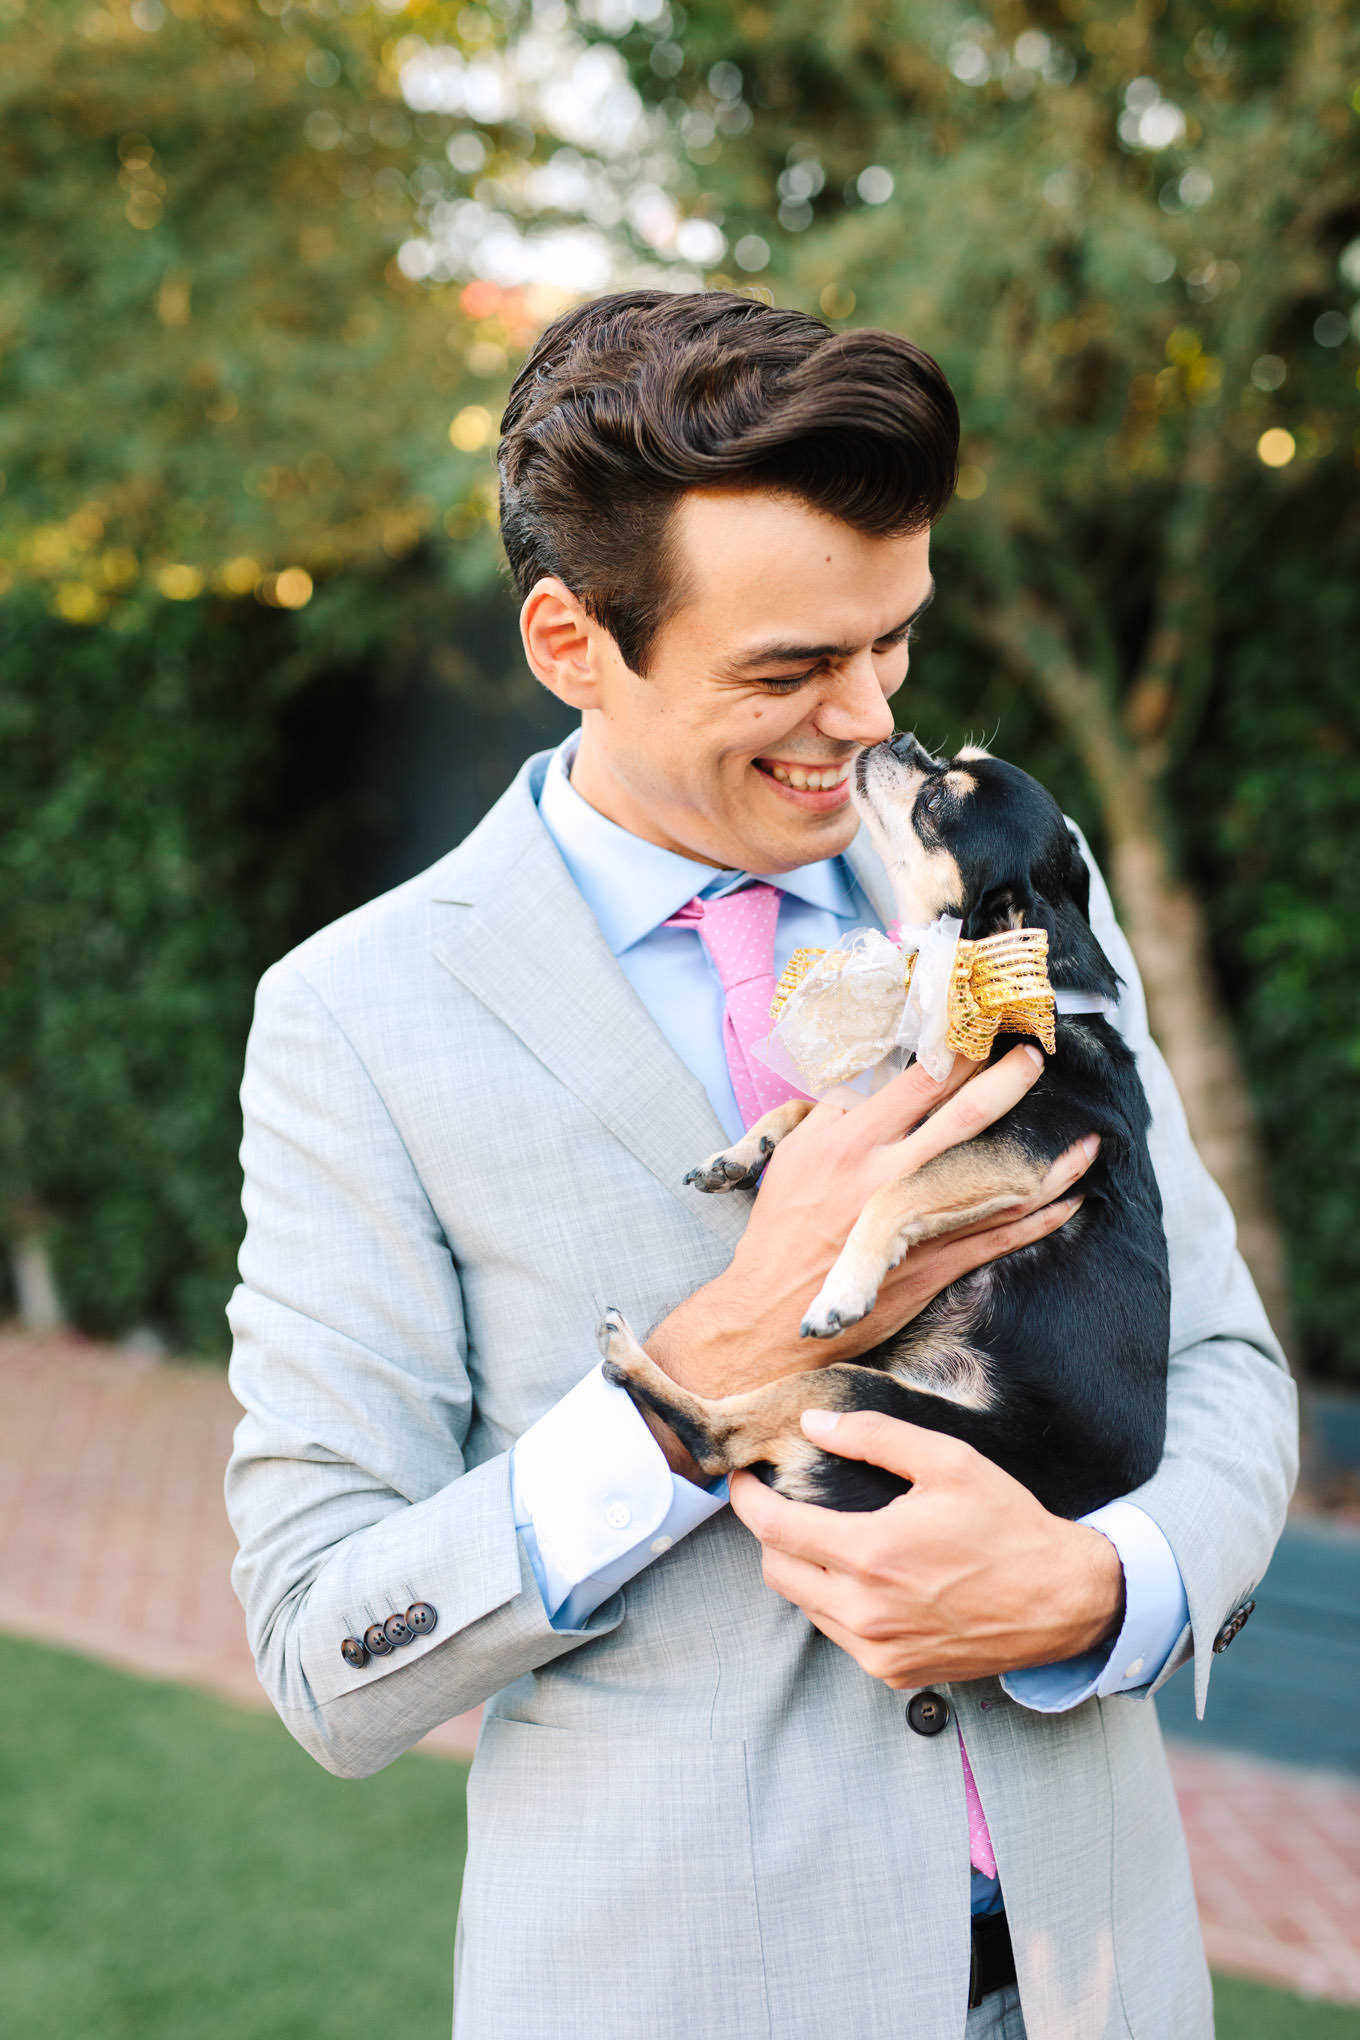 Groom with his puppy at Ruby Street wedding Los Angeles Chinatown engagement session | Engagement, elopement, and wedding photography roundup of Mary Costa’s favorite images from 2020 | Colorful and elevated photography for fun-loving couples in Southern California | #2020wedding #elopement #weddingphoto #weddingphotography #microwedding   Source: Mary Costa Photography | Los Angeles